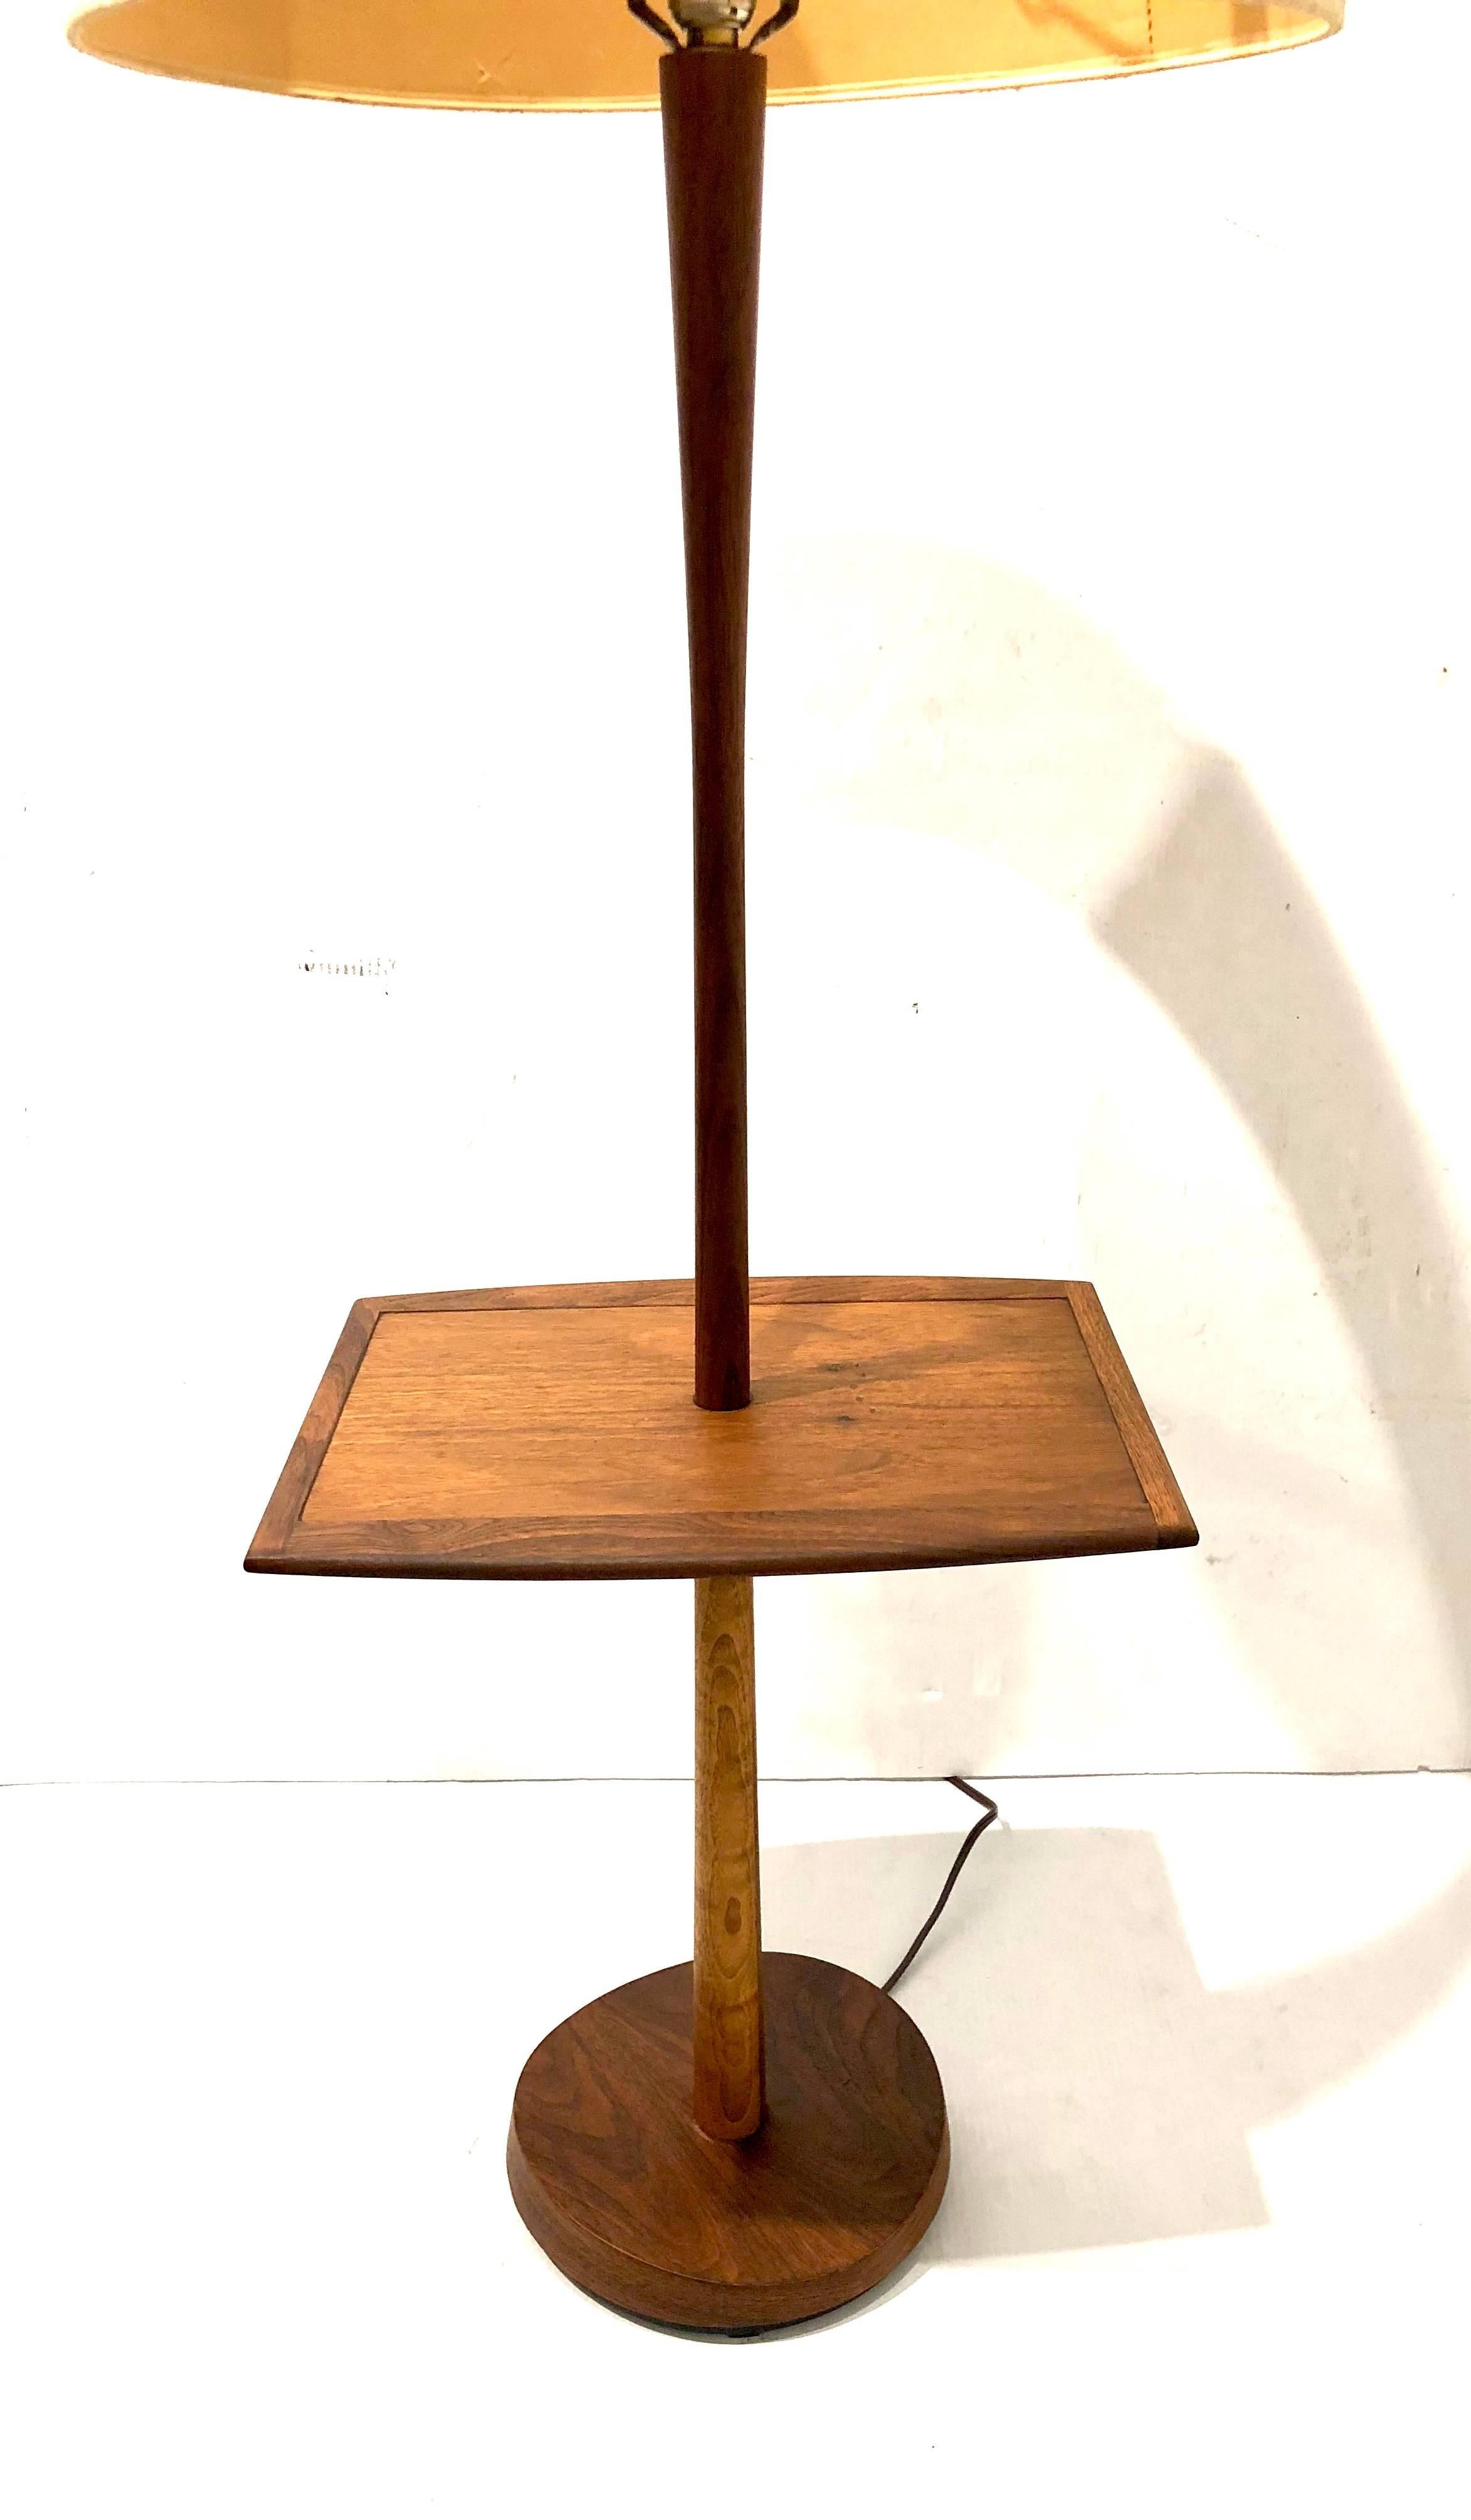 Beautiful solid walnut table lamp, circa 1950s freshly refinished and restored and rewired, iconic piece with its original lampshade in very nice and clean condition 19' in diameter and 11" tall lampshade dimensions.